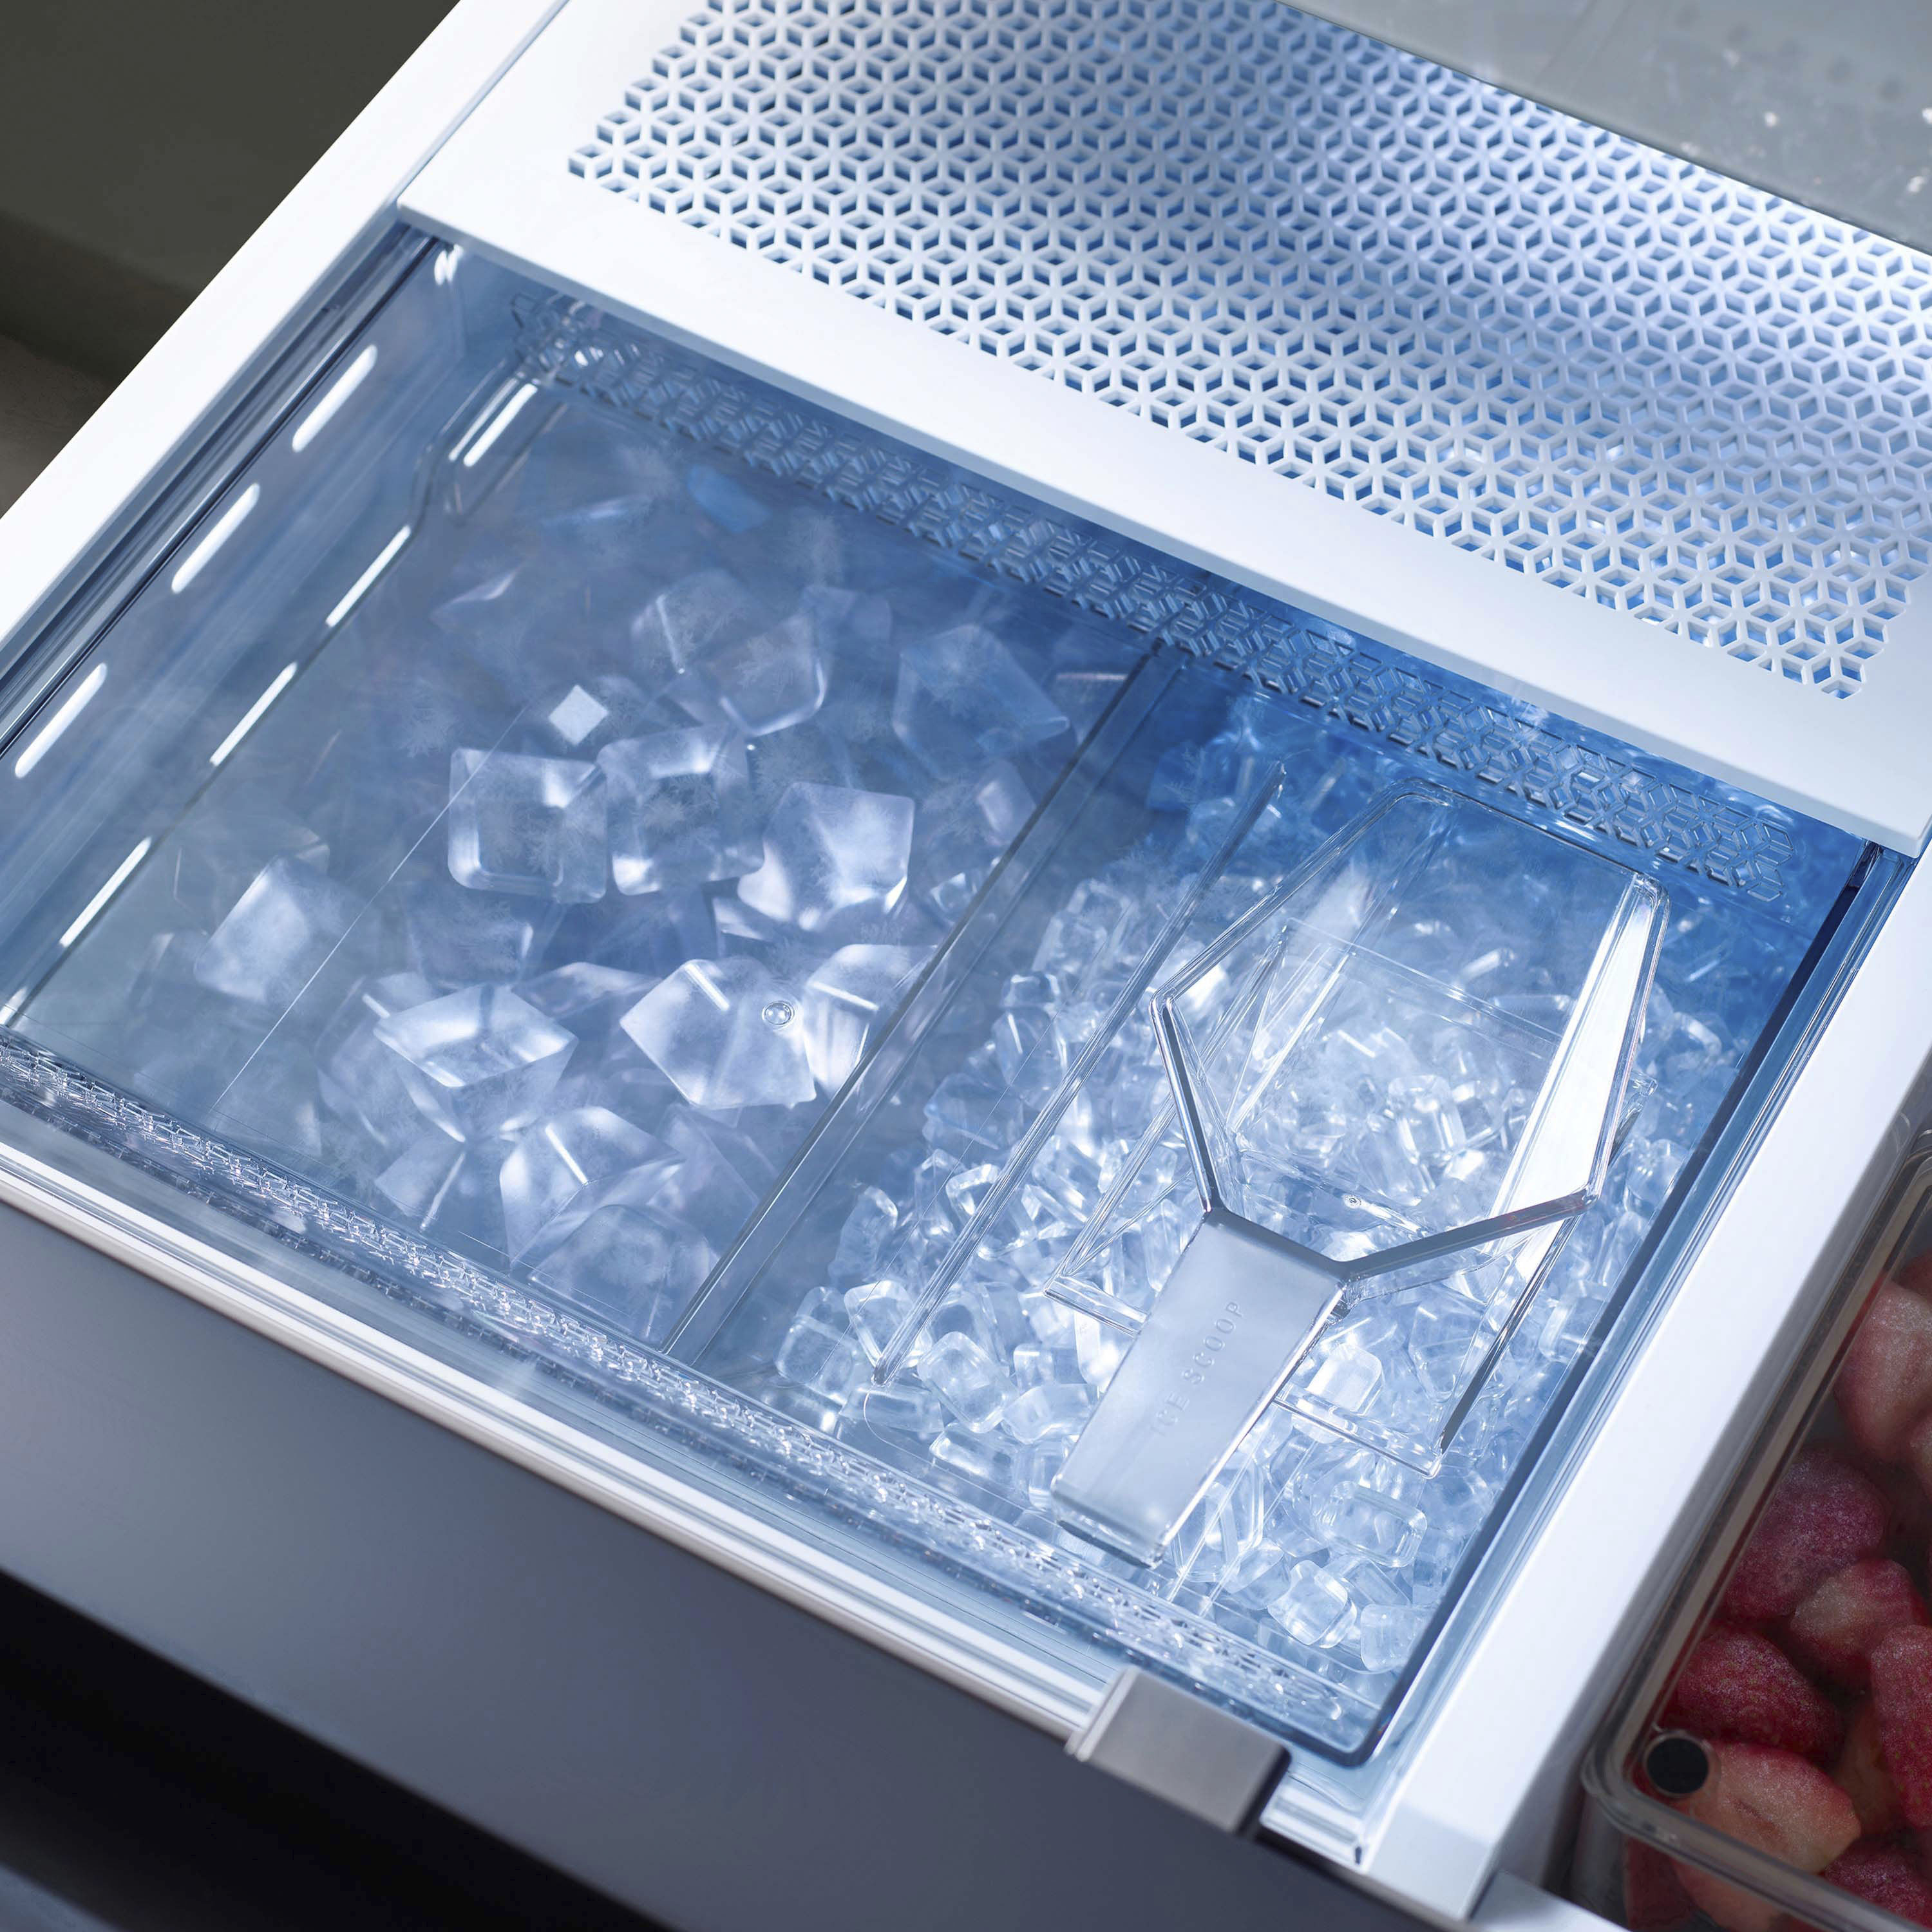 Turn the BESPOKE Dual Ice Maker on or off